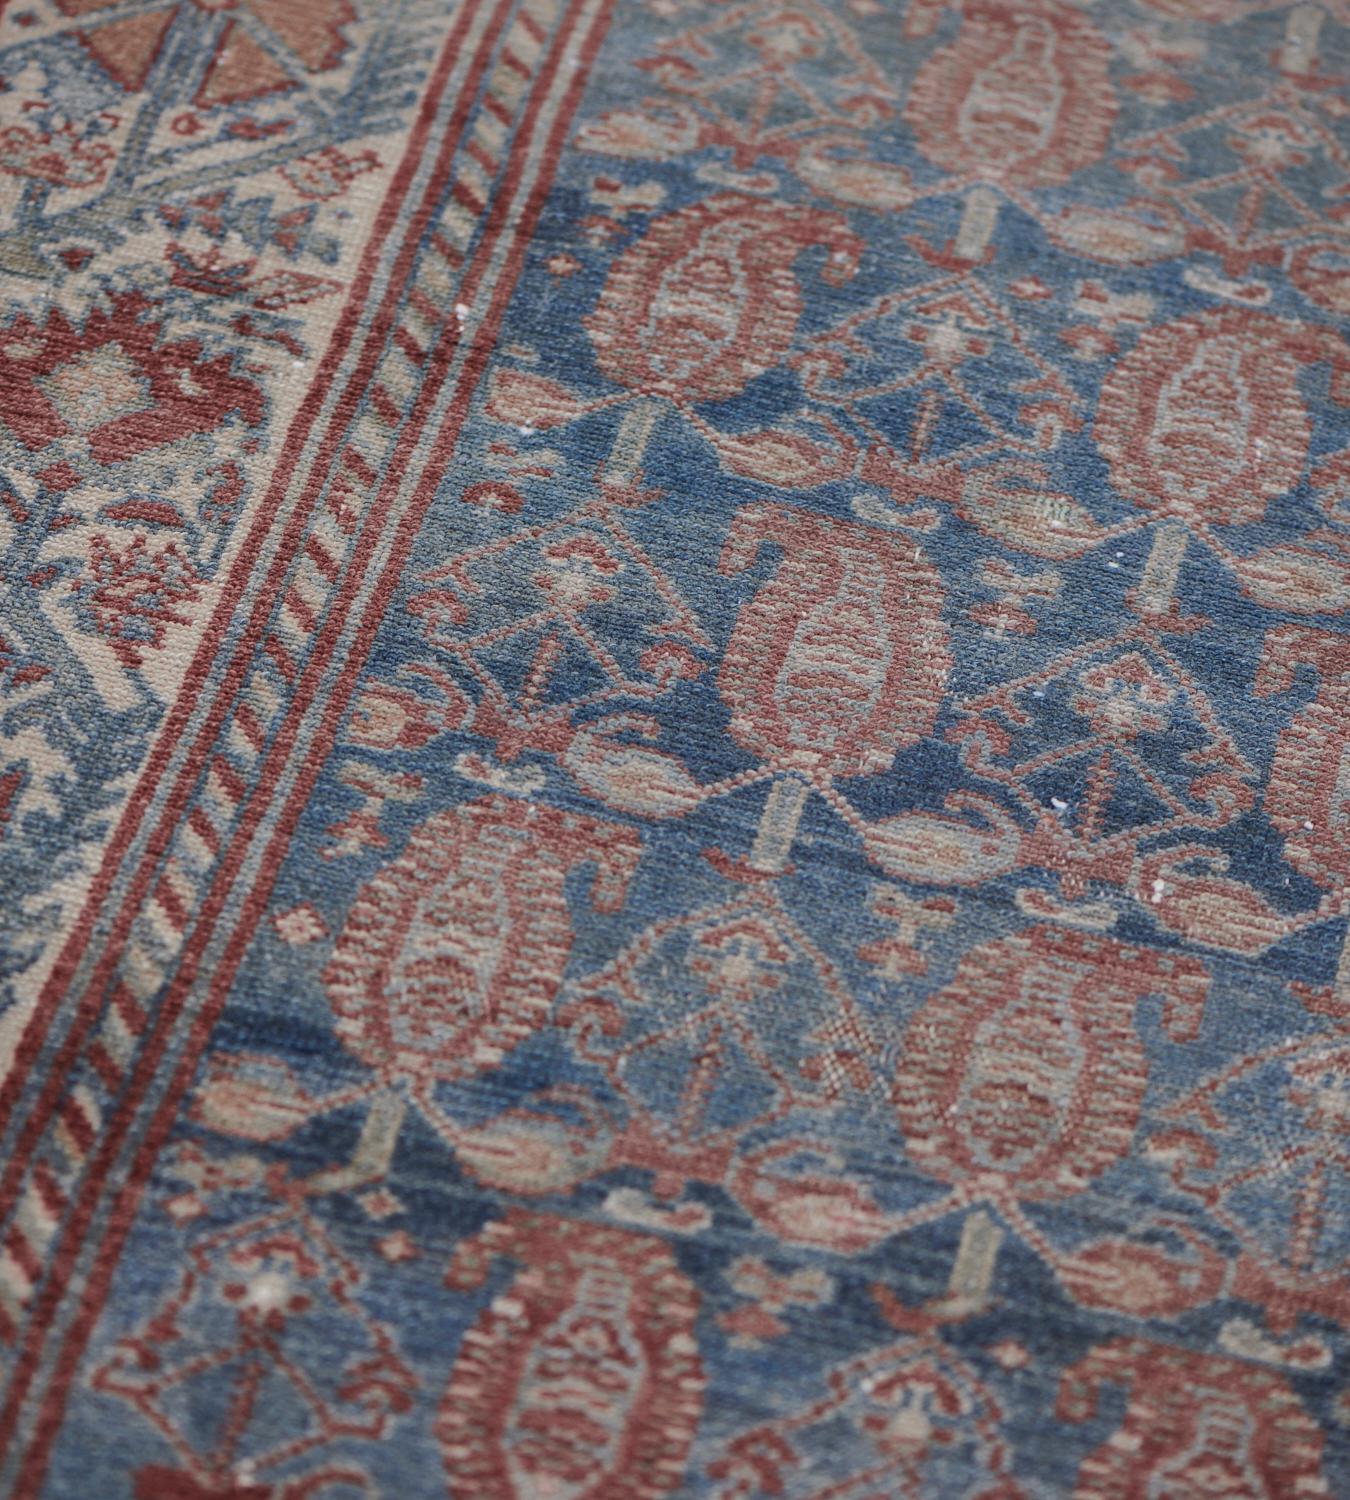 This antique, circa 1910, Malayer runner has a shaded blue field with an overall design of fox-brown boteh linked by an angular floral lozenge and small flowerheads, in a broad ivory border with a dense polychrome angular flowerhead and serrated